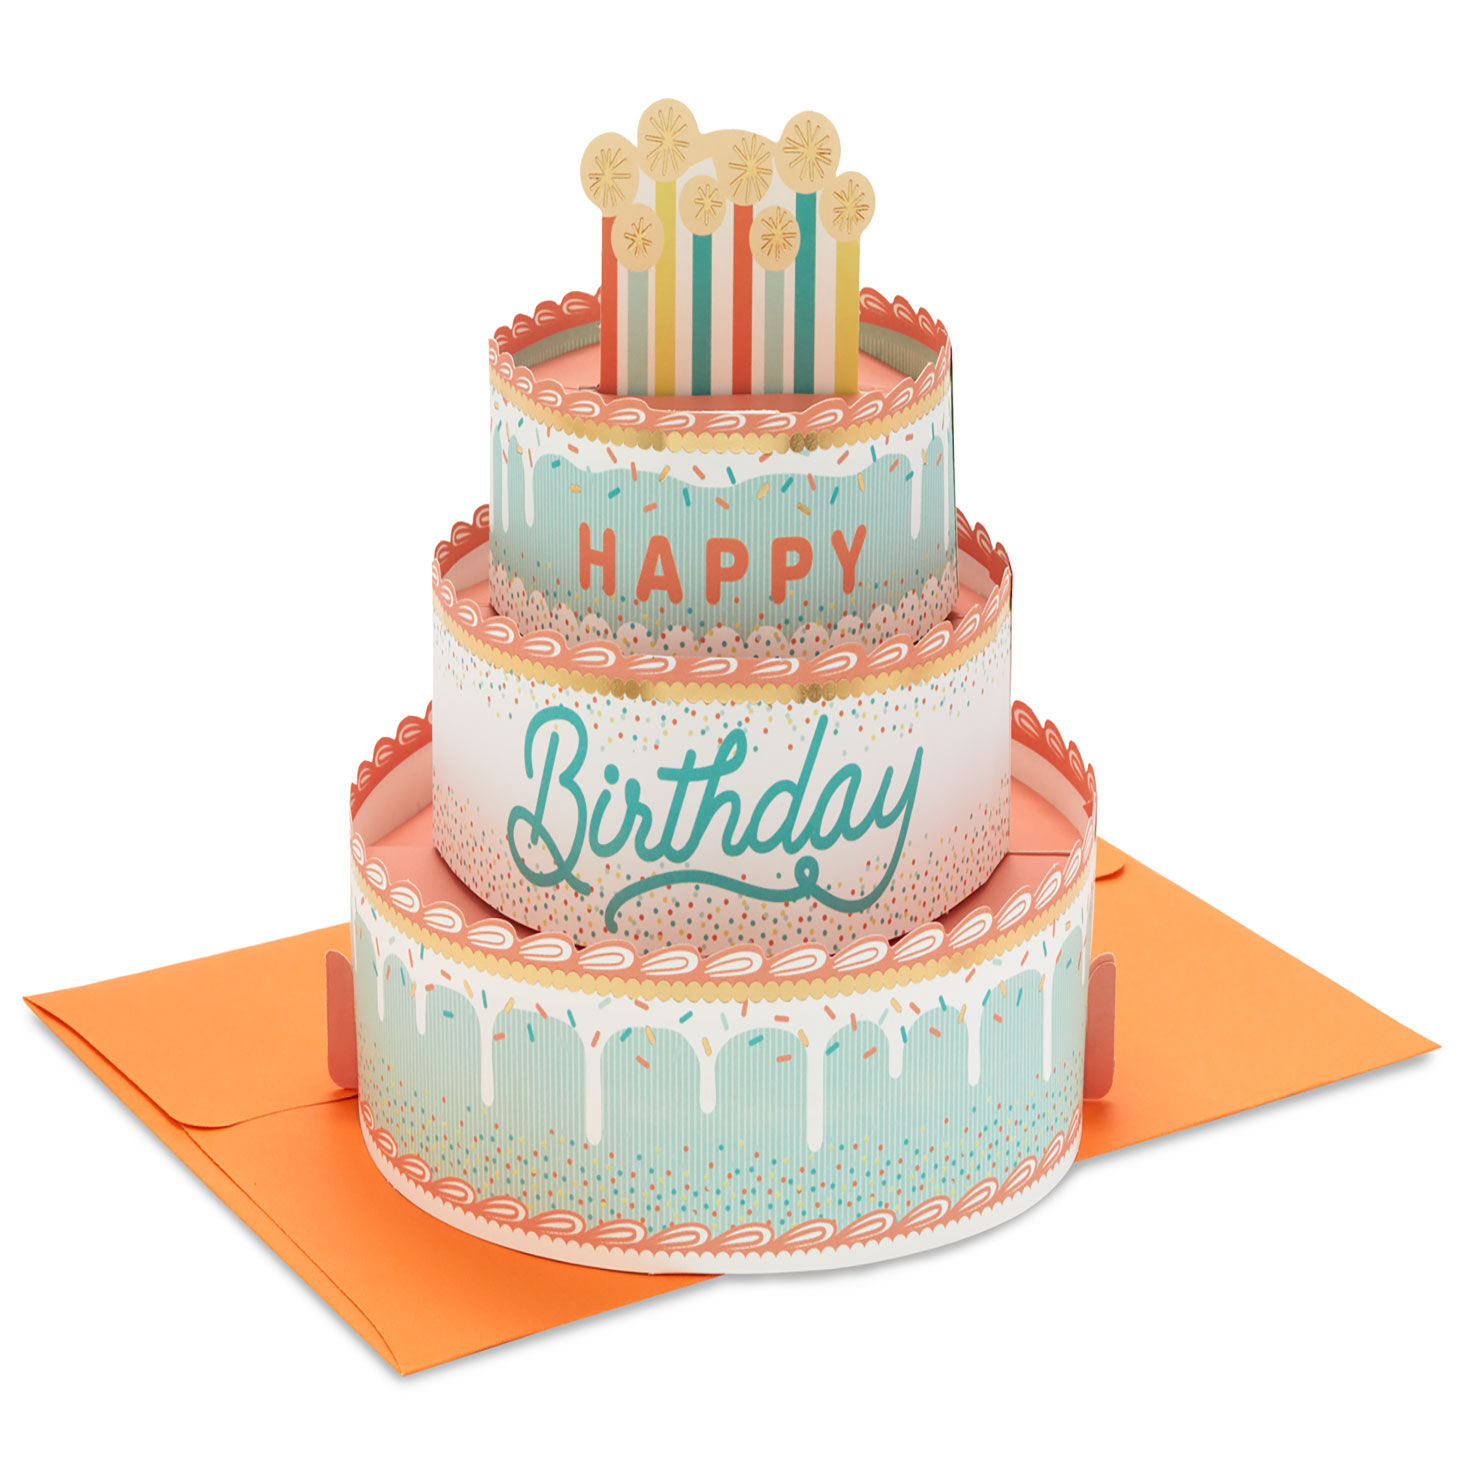 Lots of Love and Cake 3D Pop-Up Card for only USD 7.99 | Hallmark